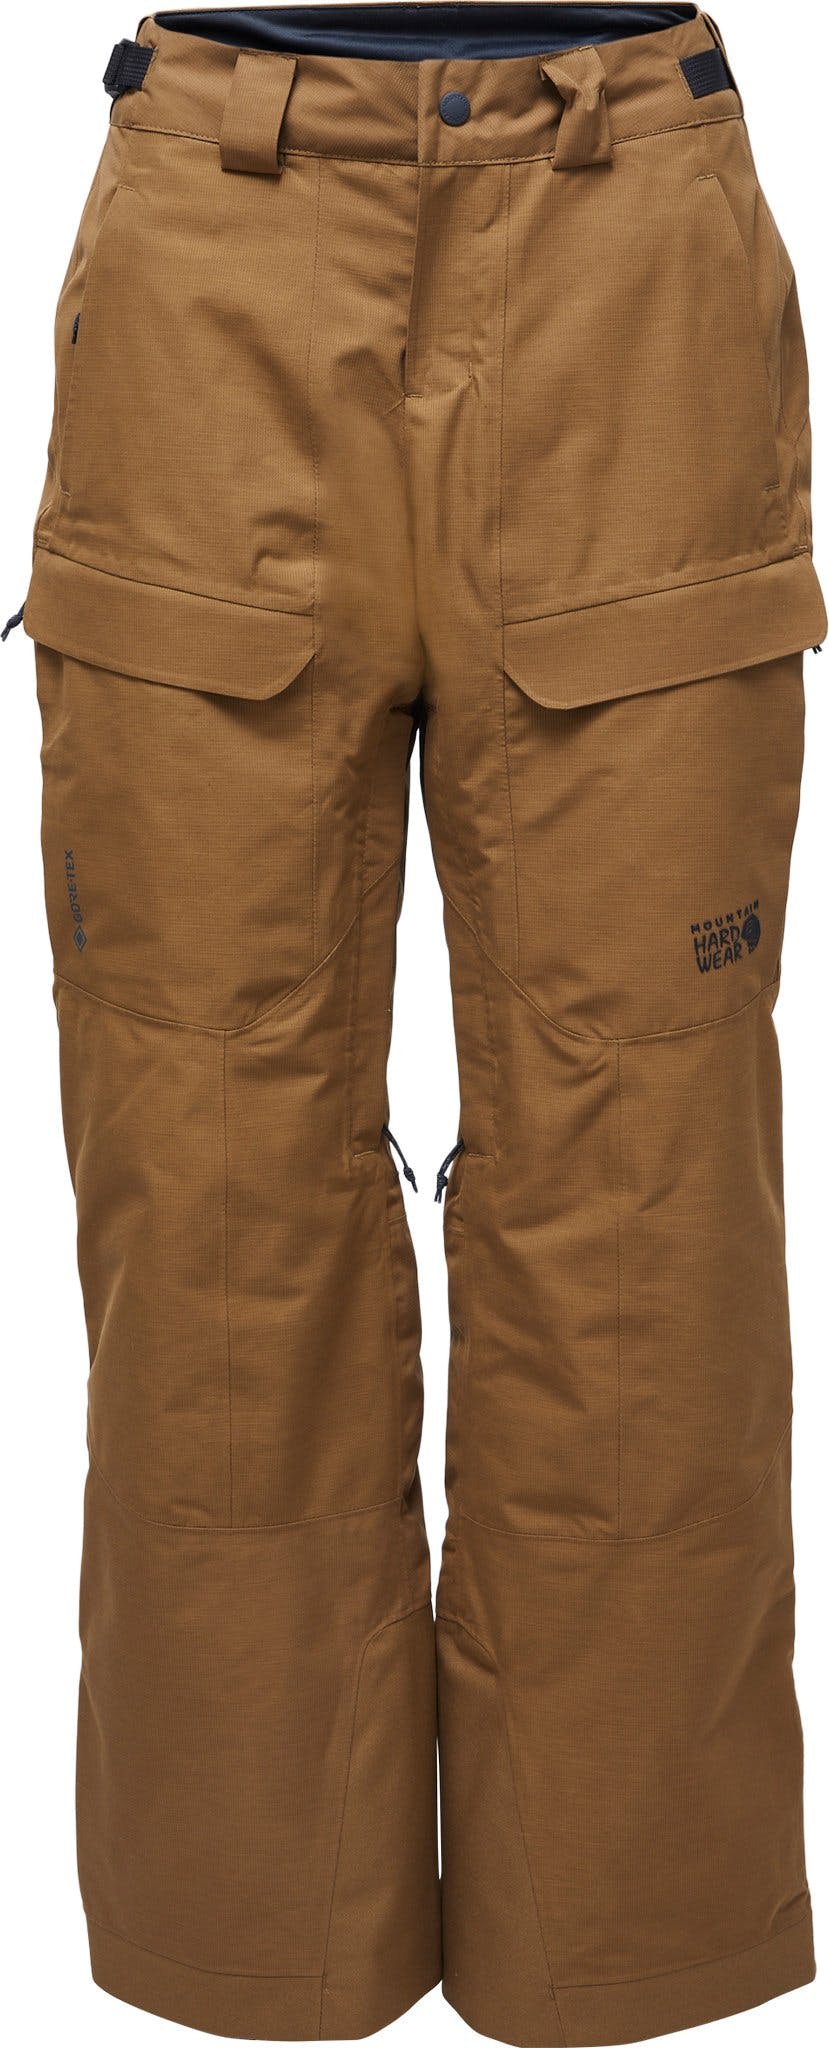 Product image for Cloud Bank™ Gore-Tex® Insulated Pant - Women's